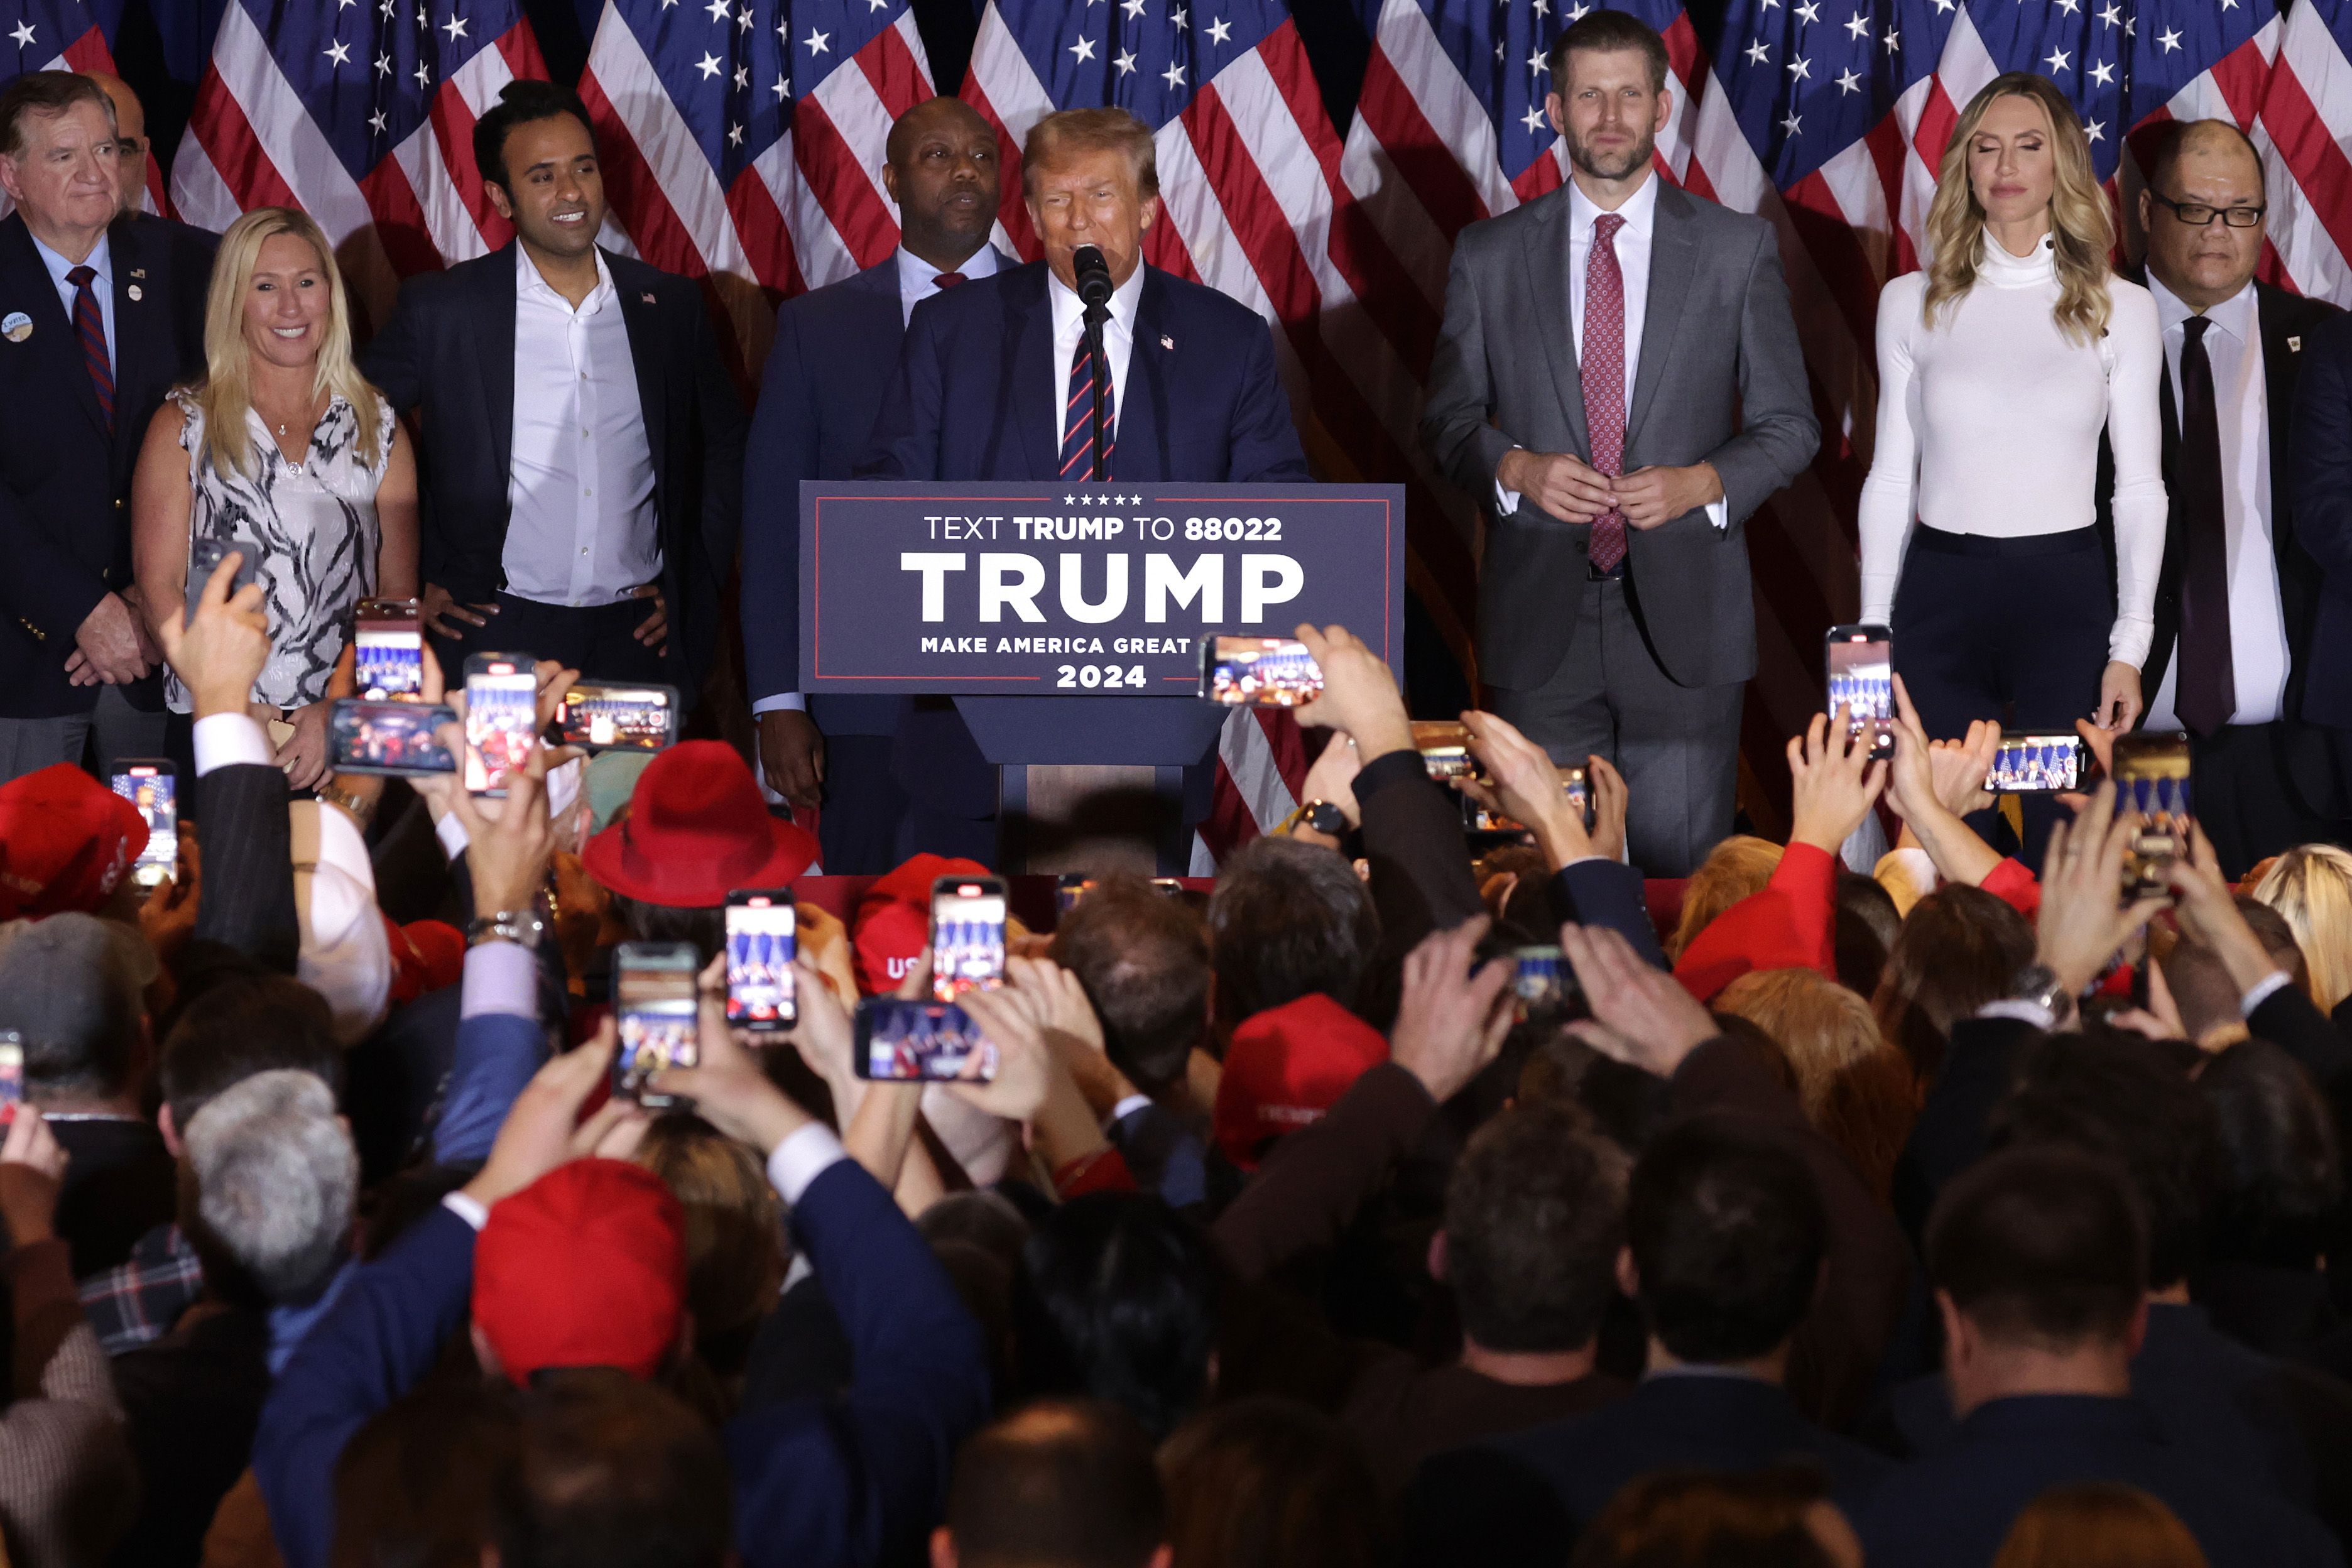 Republican presidential candidate and former U.S. President Donald Trump delivers remarks alongside supporters, campaign staff and family members during his primary night rally at the Sheraton on January 23, 2024 in Nashua, New Hampshire. 